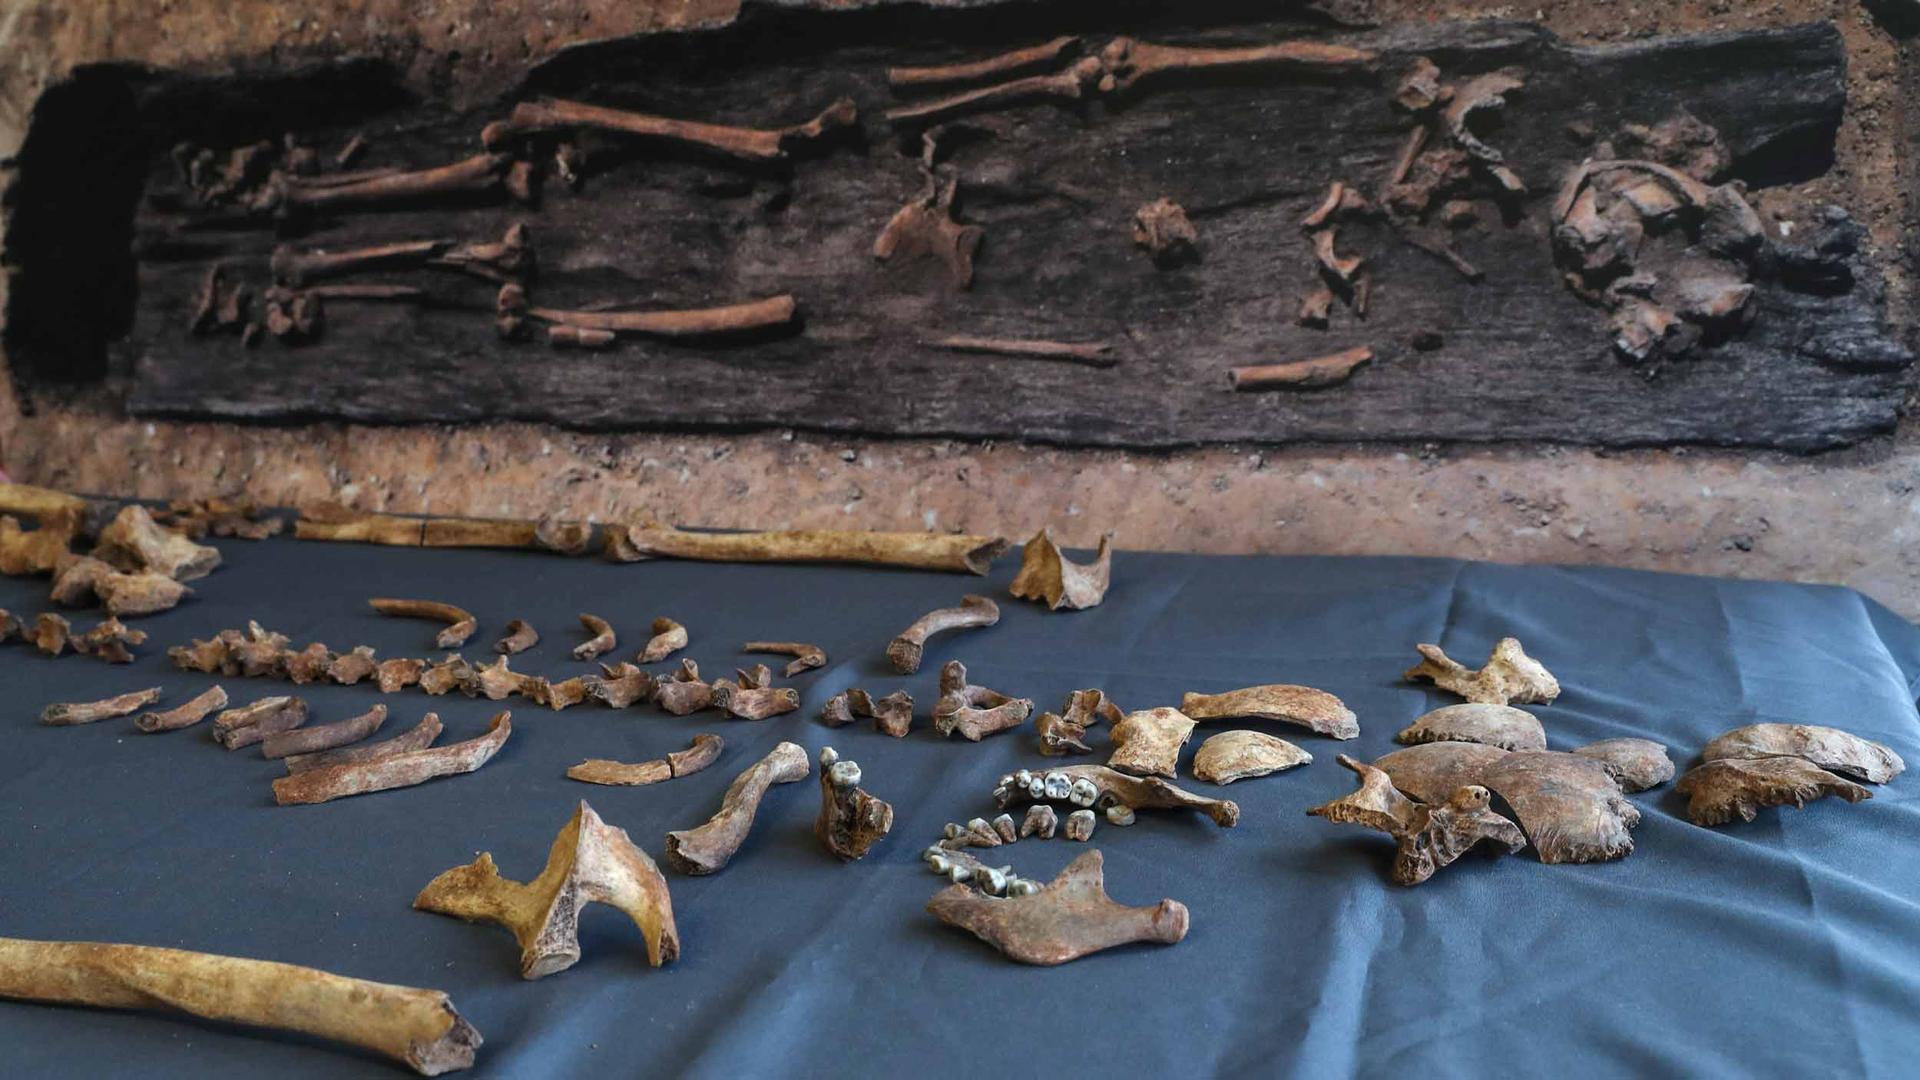 Human bones are laid out on a blue cloth. Behind them is a photo of them in the earth